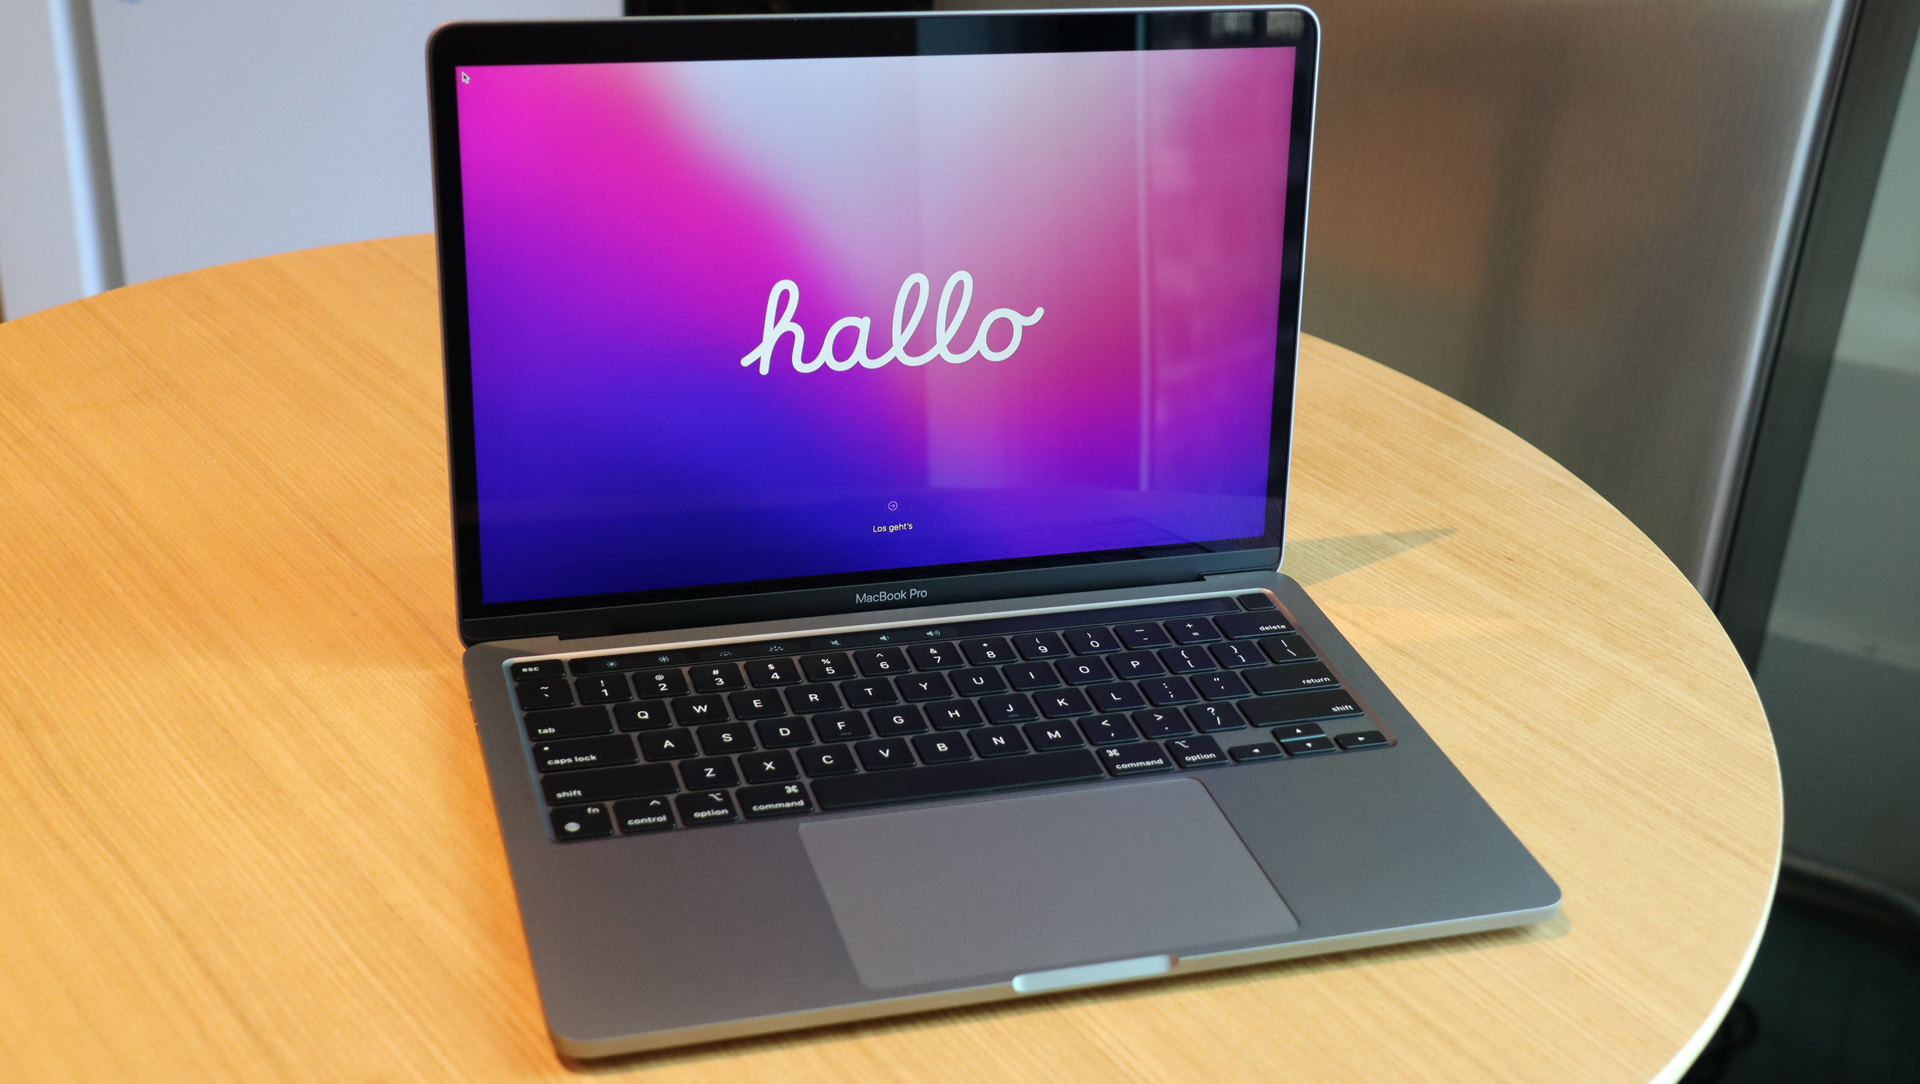 The M2 MacBook Pro is phenomenal - but man, I'm going to miss the